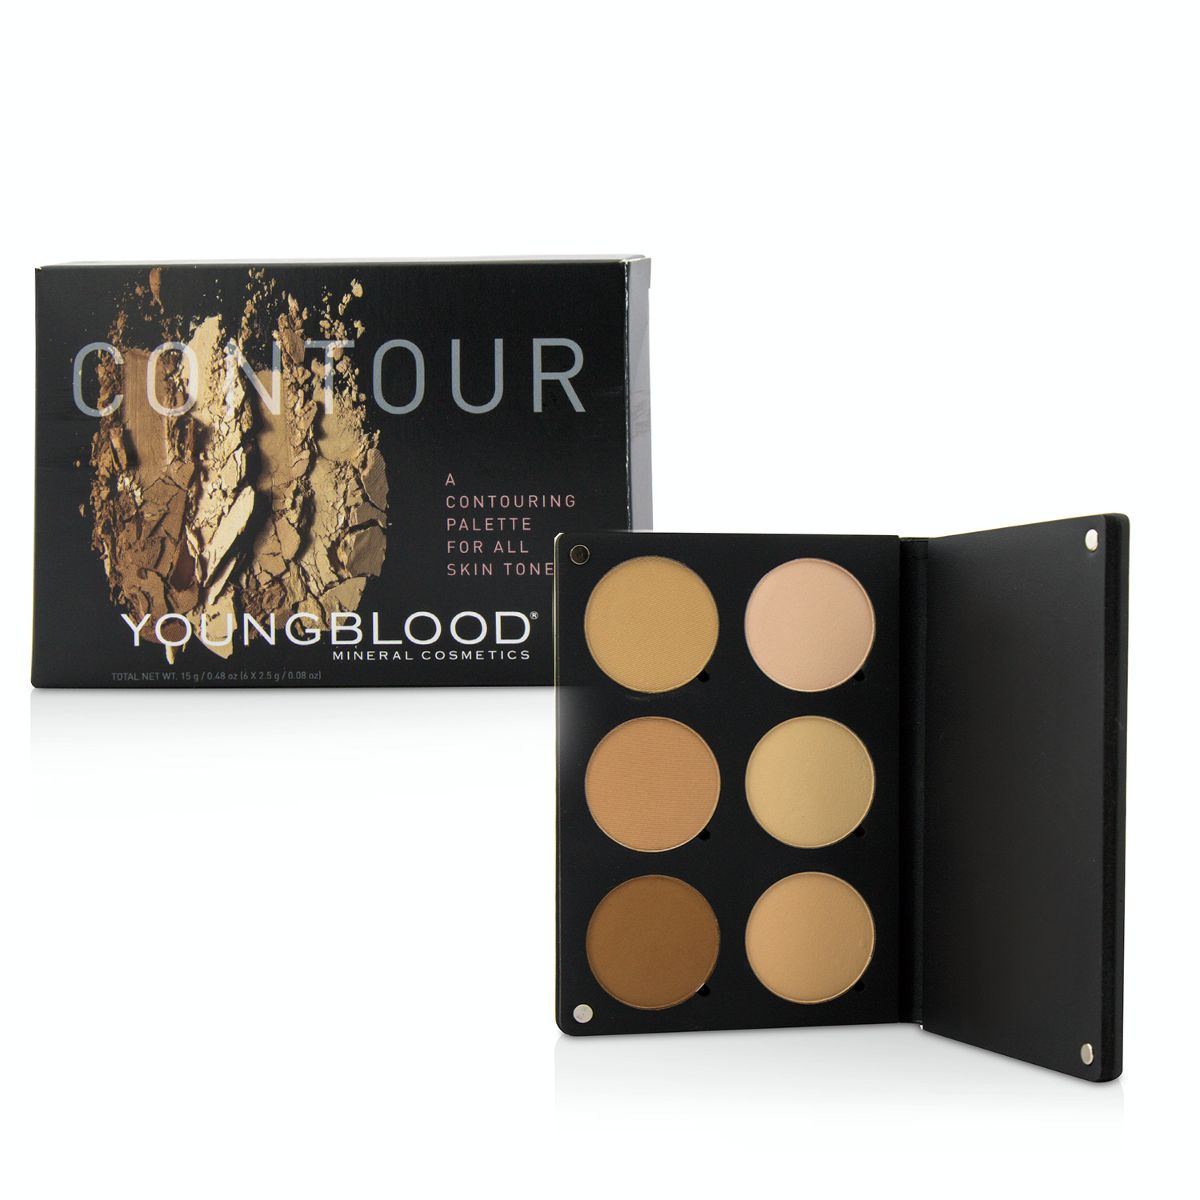 Contour Palette For All Skin Tones (3x Highlight Shades 3x Contouring Shades) Youngblood Image